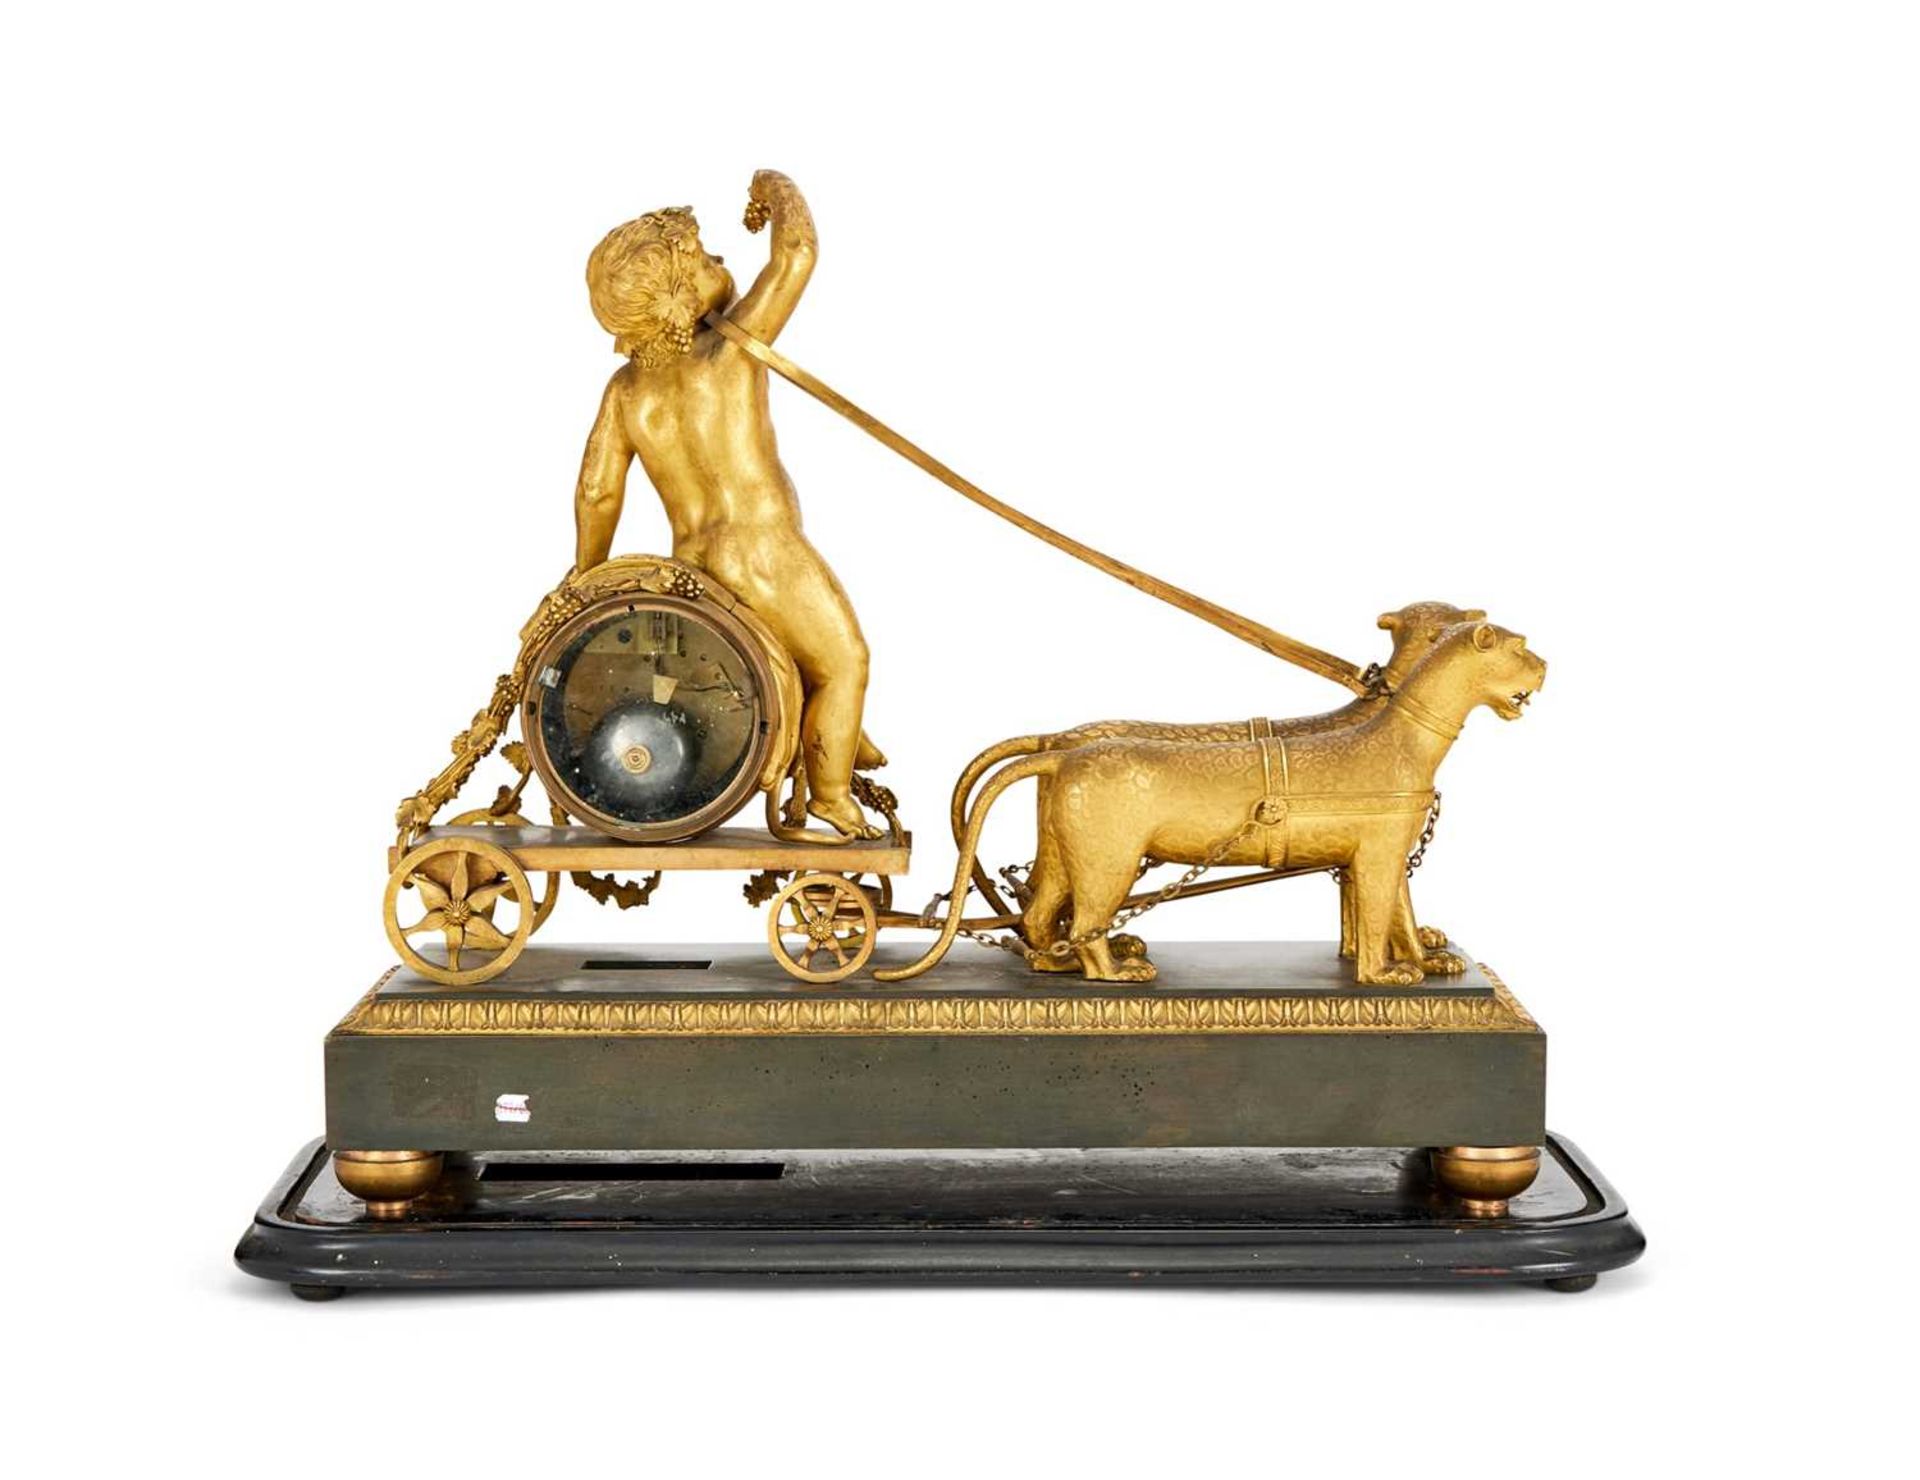 AN EXCEPTIONAL LATE 18TH CENTURY LOUIS XVI PERIOD GILT BRONZE MANTEL CLOCK - Image 5 of 5